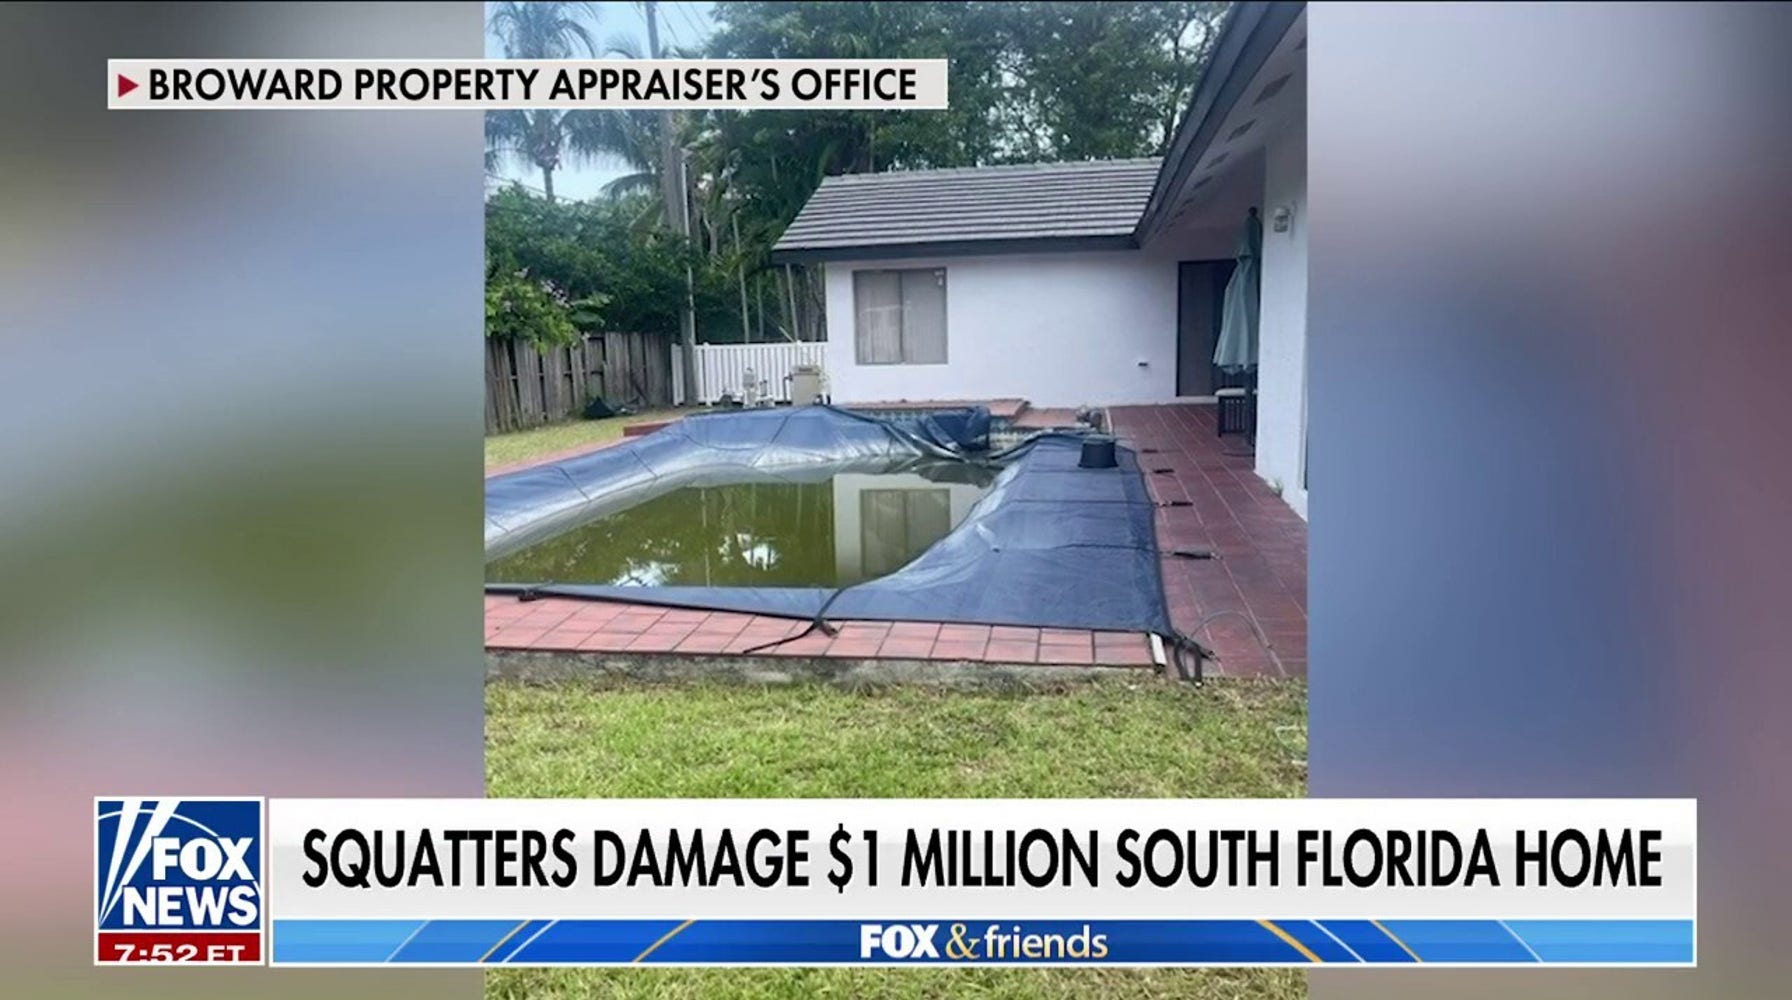 Florida Takes Steps to Combat Squatters